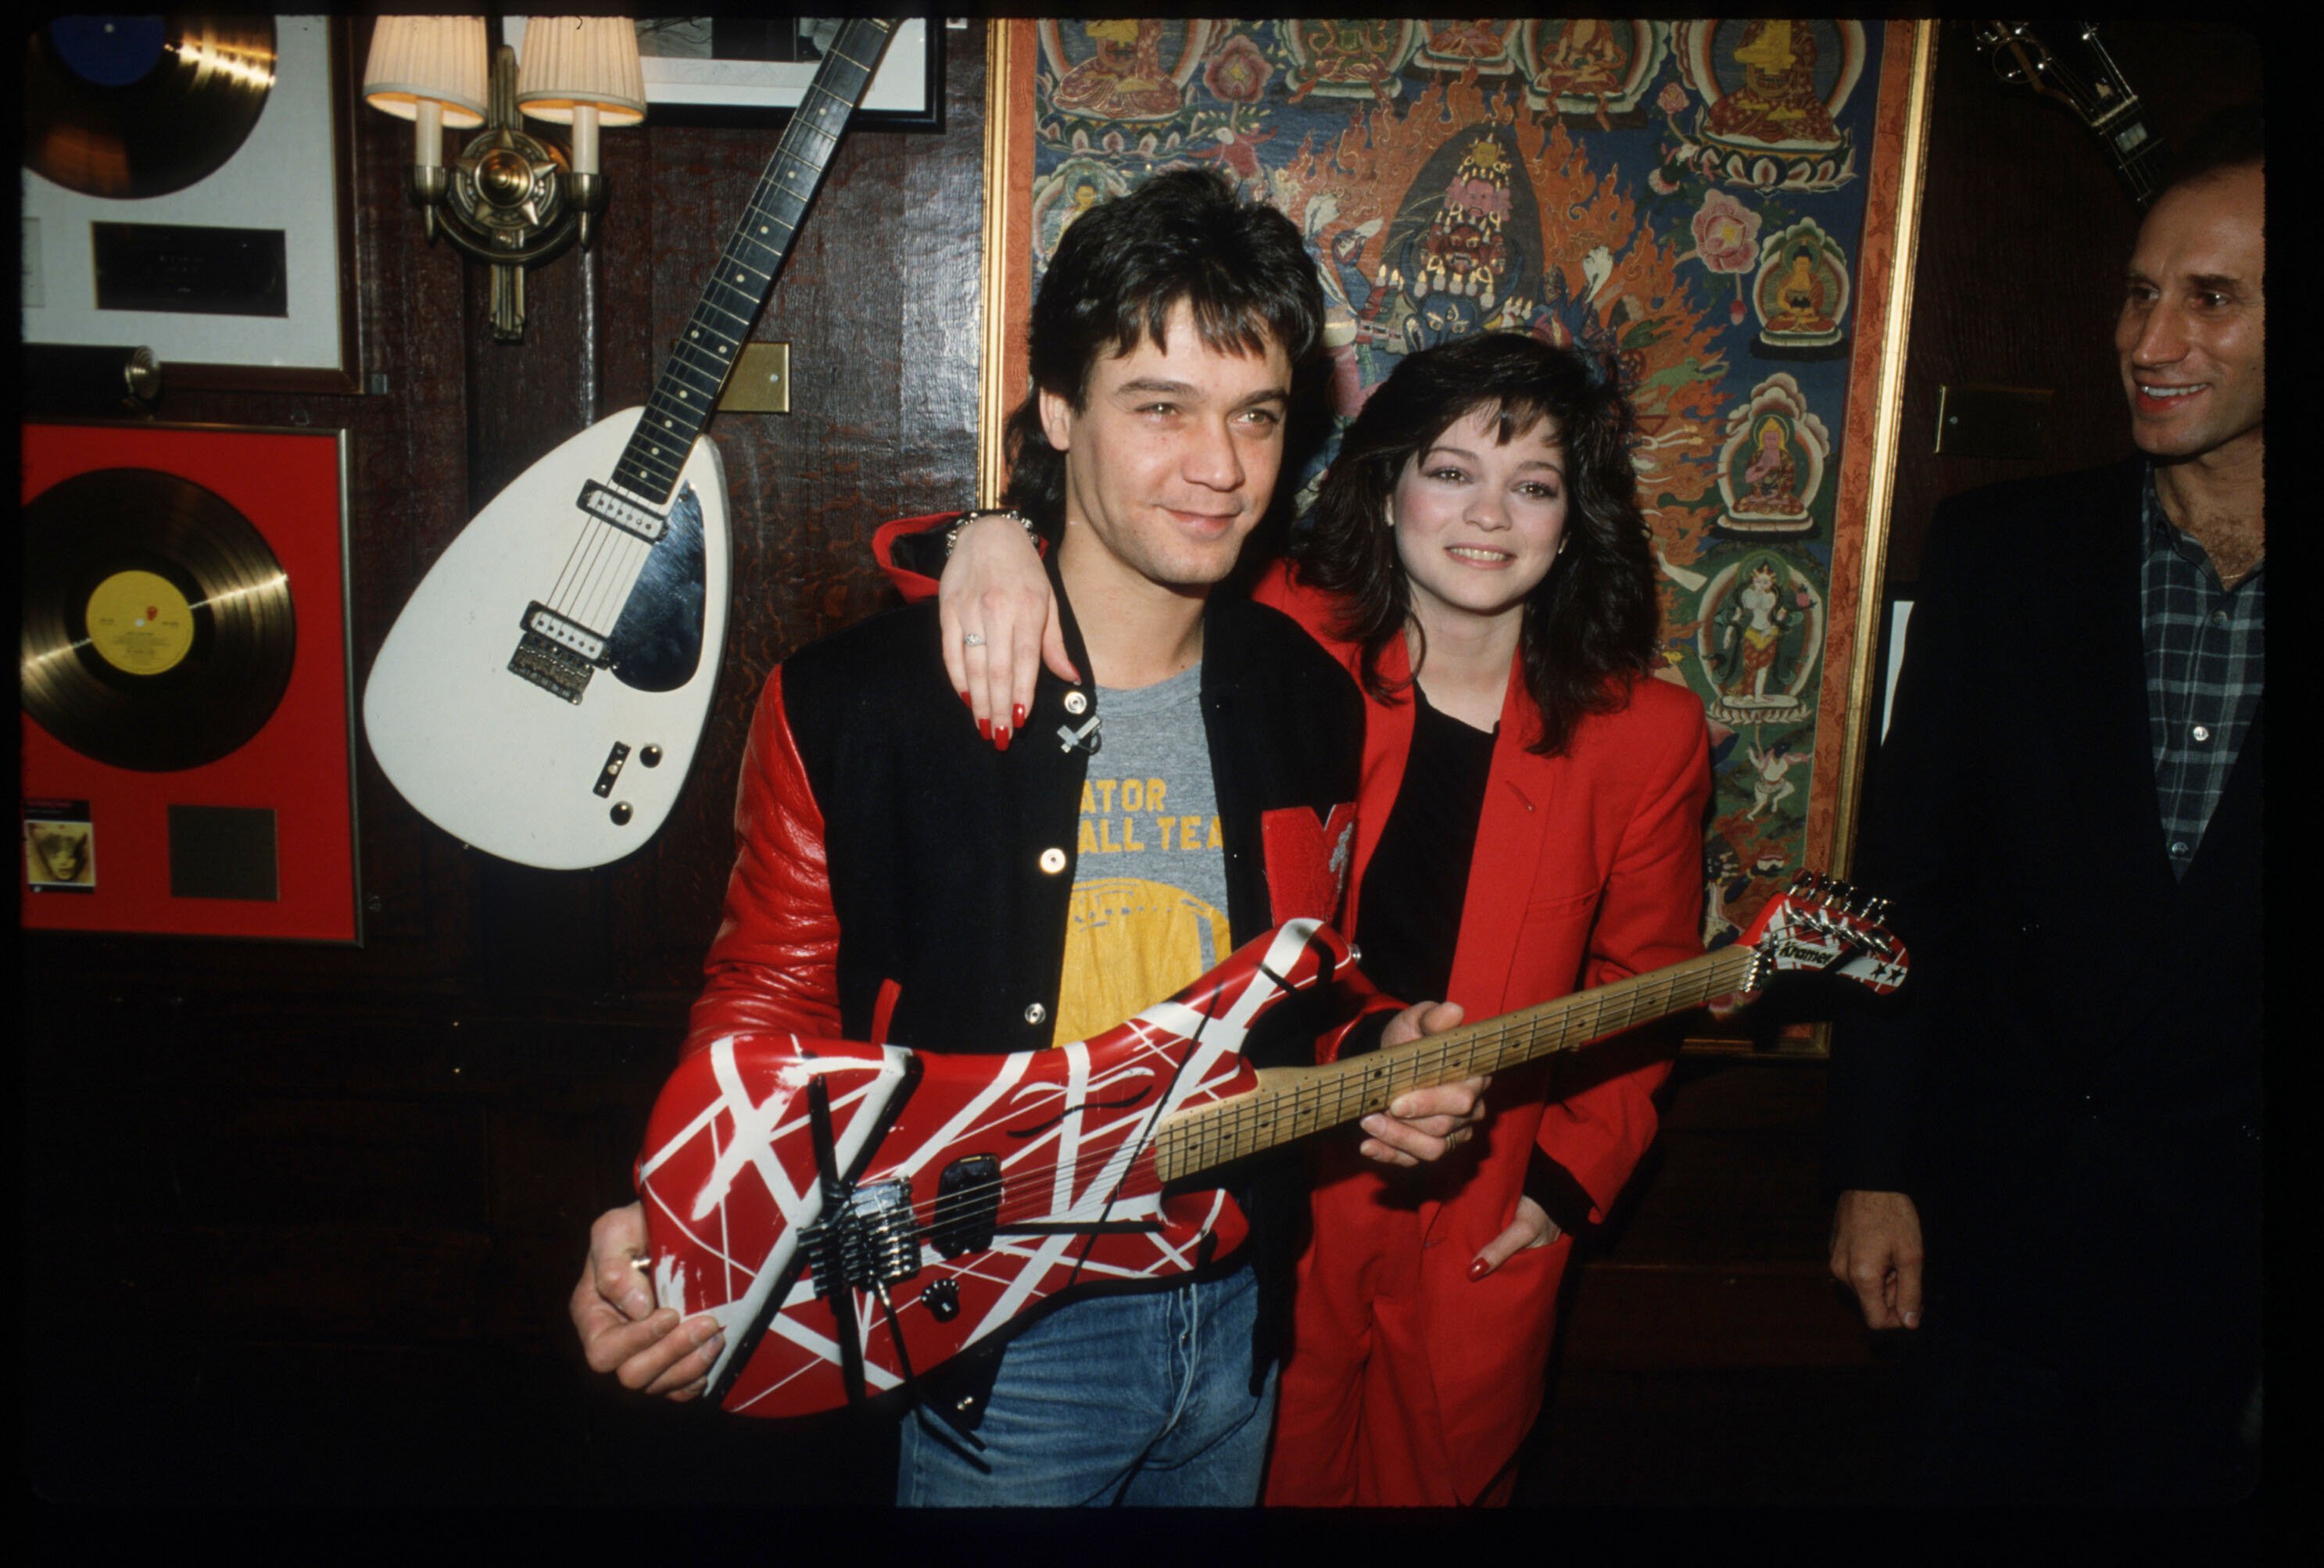 Actor Valerie Bertinelli, right, with then-husband guitarist Eddie Van Halen as he donates a red guitar to Hard Rock Cafe in 1995.